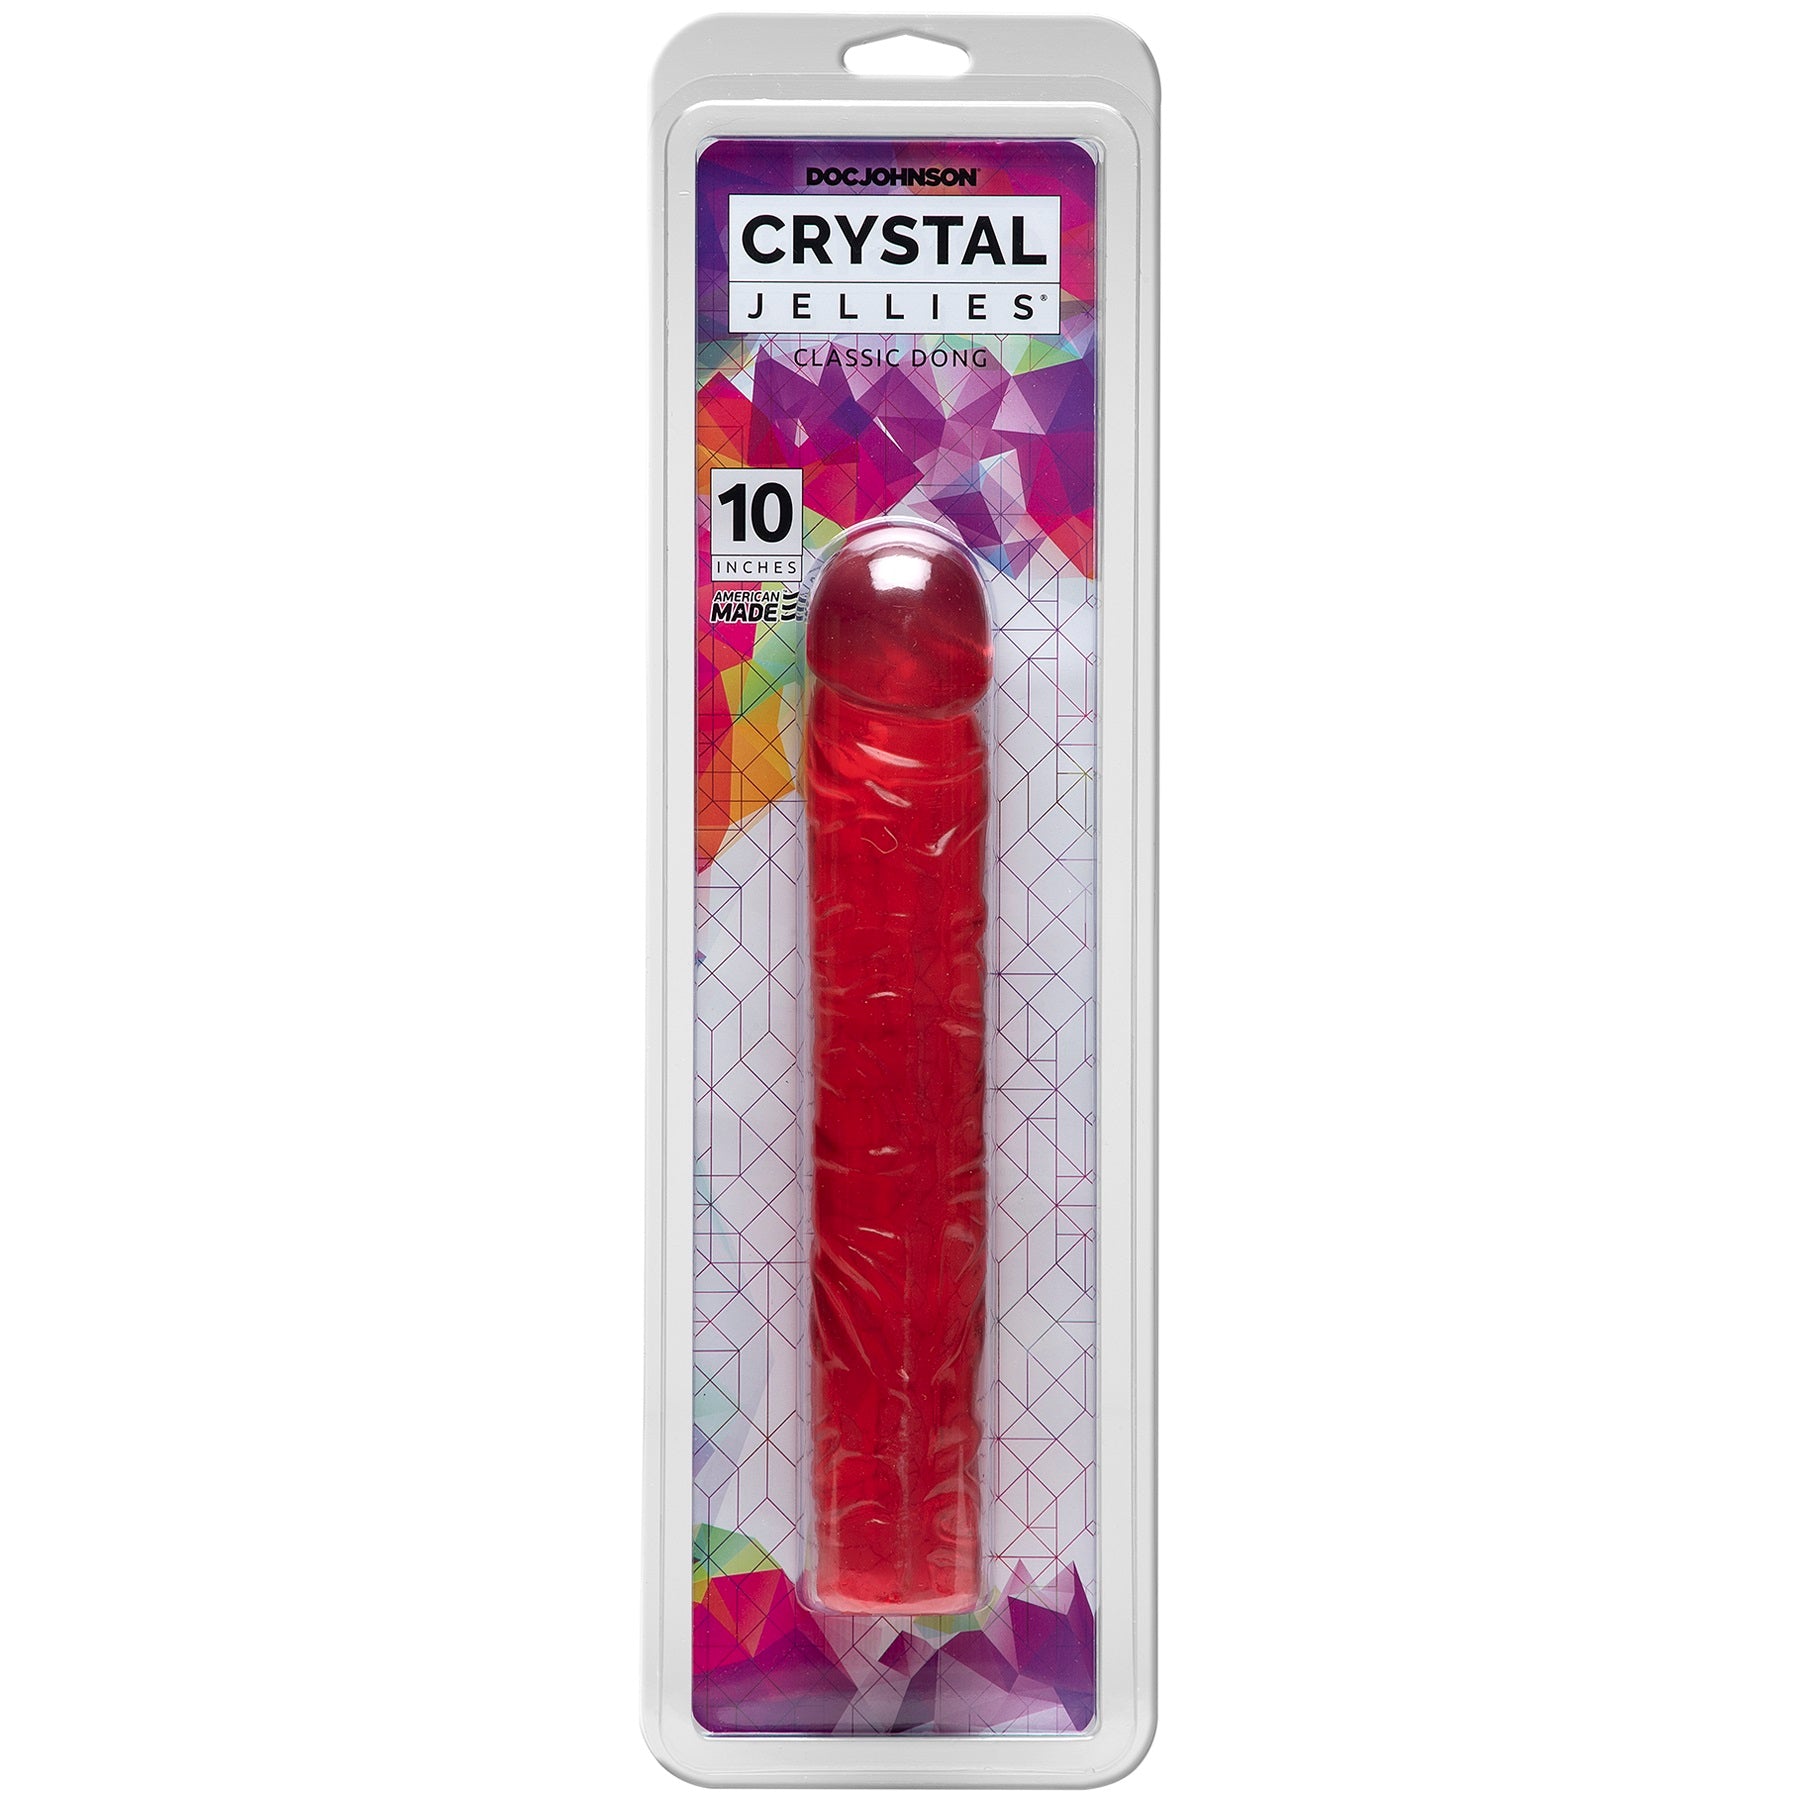 Doc Johnson Crystal Jellies 10" Classic Dong - Pink - Extreme Toyz Singapore - https://extremetoyz.com.sg - Sex Toys and Lingerie Online Store - Bondage Gear / Vibrators / Electrosex Toys / Wireless Remote Control Vibes / Sexy Lingerie and Role Play / BDSM / Dungeon Furnitures / Dildos and Strap Ons &nbsp;/ Anal and Prostate Massagers / Anal Douche and Cleaning Aide / Delay Sprays and Gels / Lubricants and more...